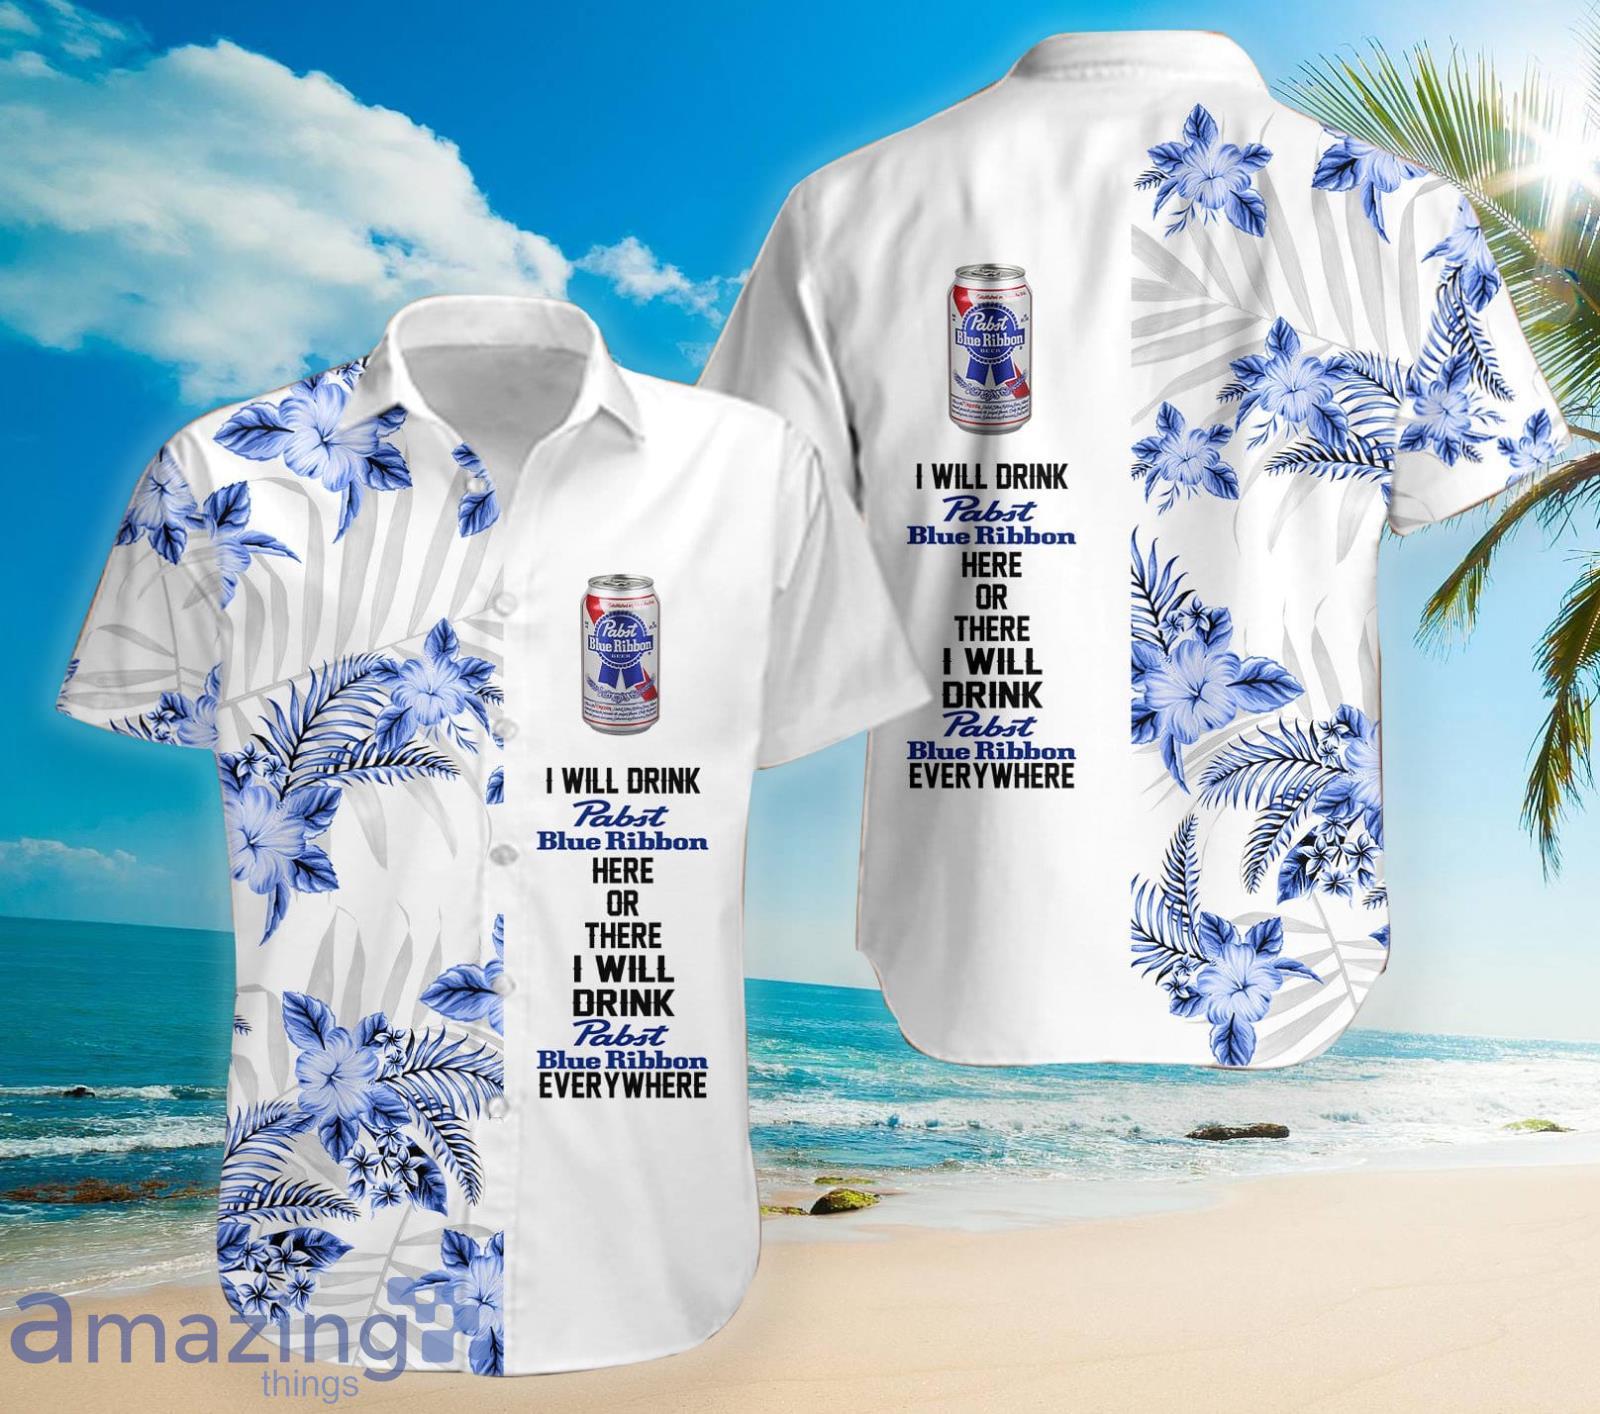 I Will Drink Pabst Blue Ribbon White Hawaiian Shirt For Men And Women